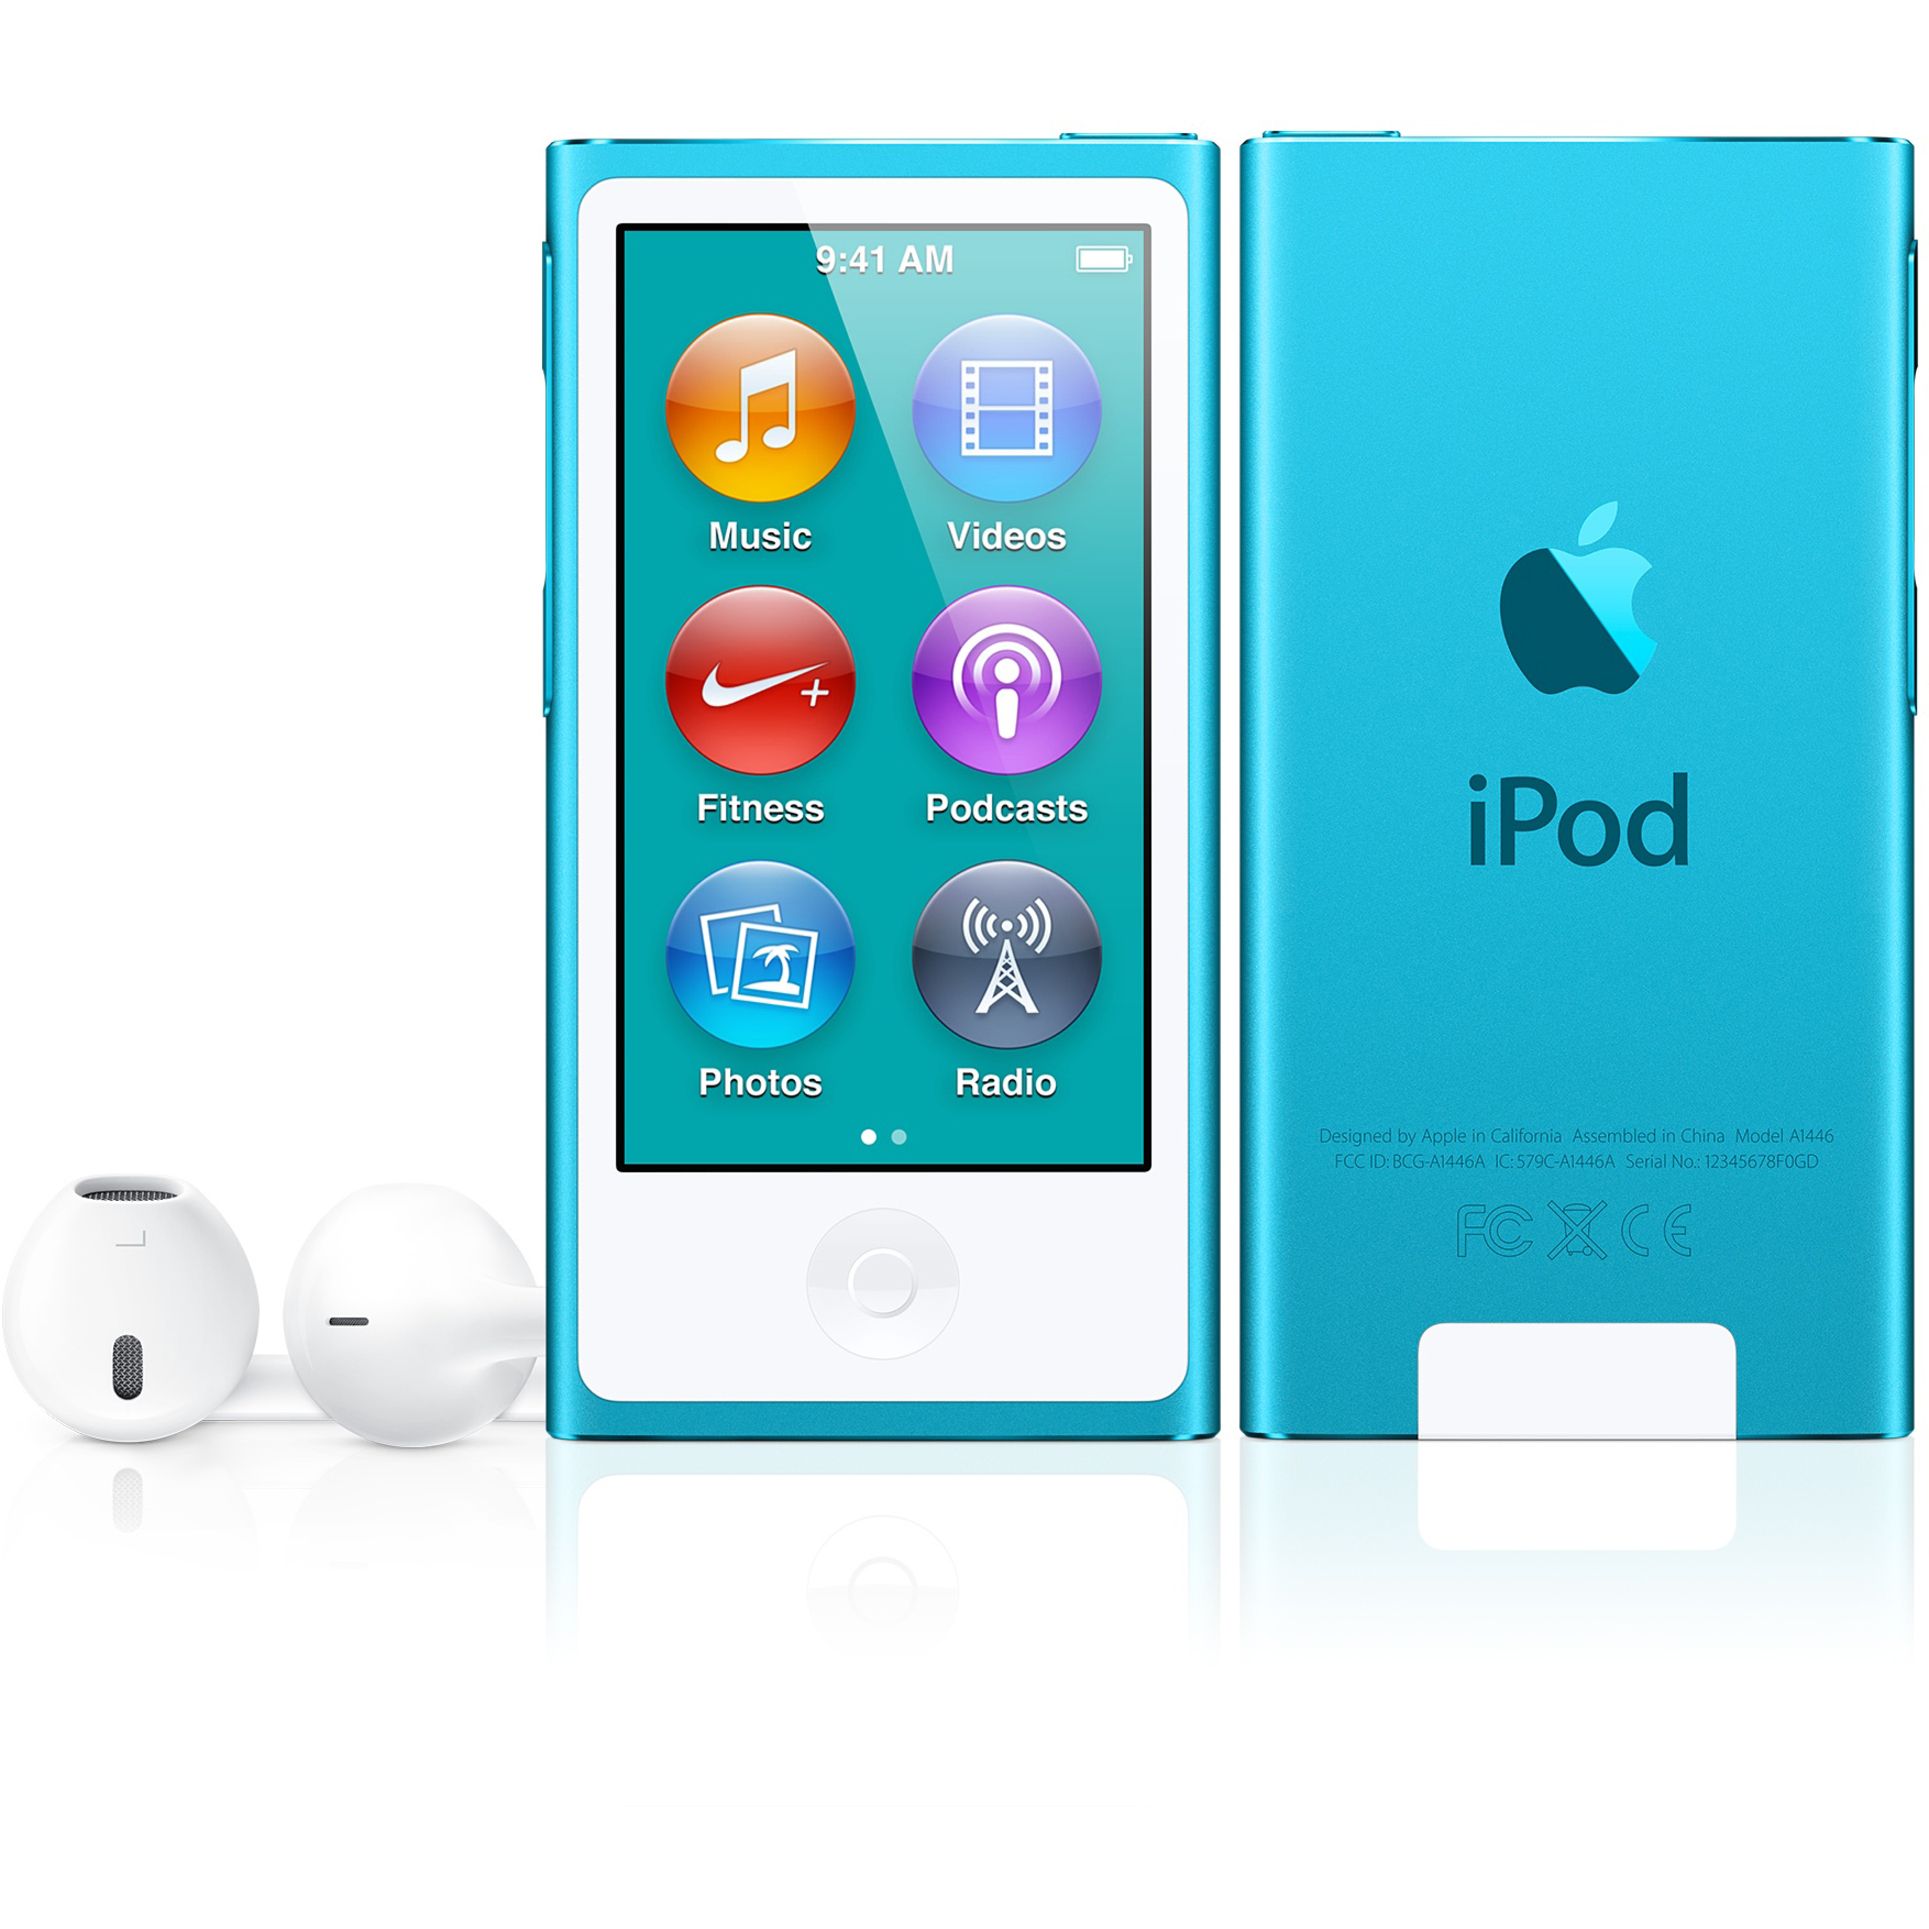 Apple iPod nano 7G 16GB MP3/Video Player with LCD Display & Touchscreen, Blue - image 1 of 3